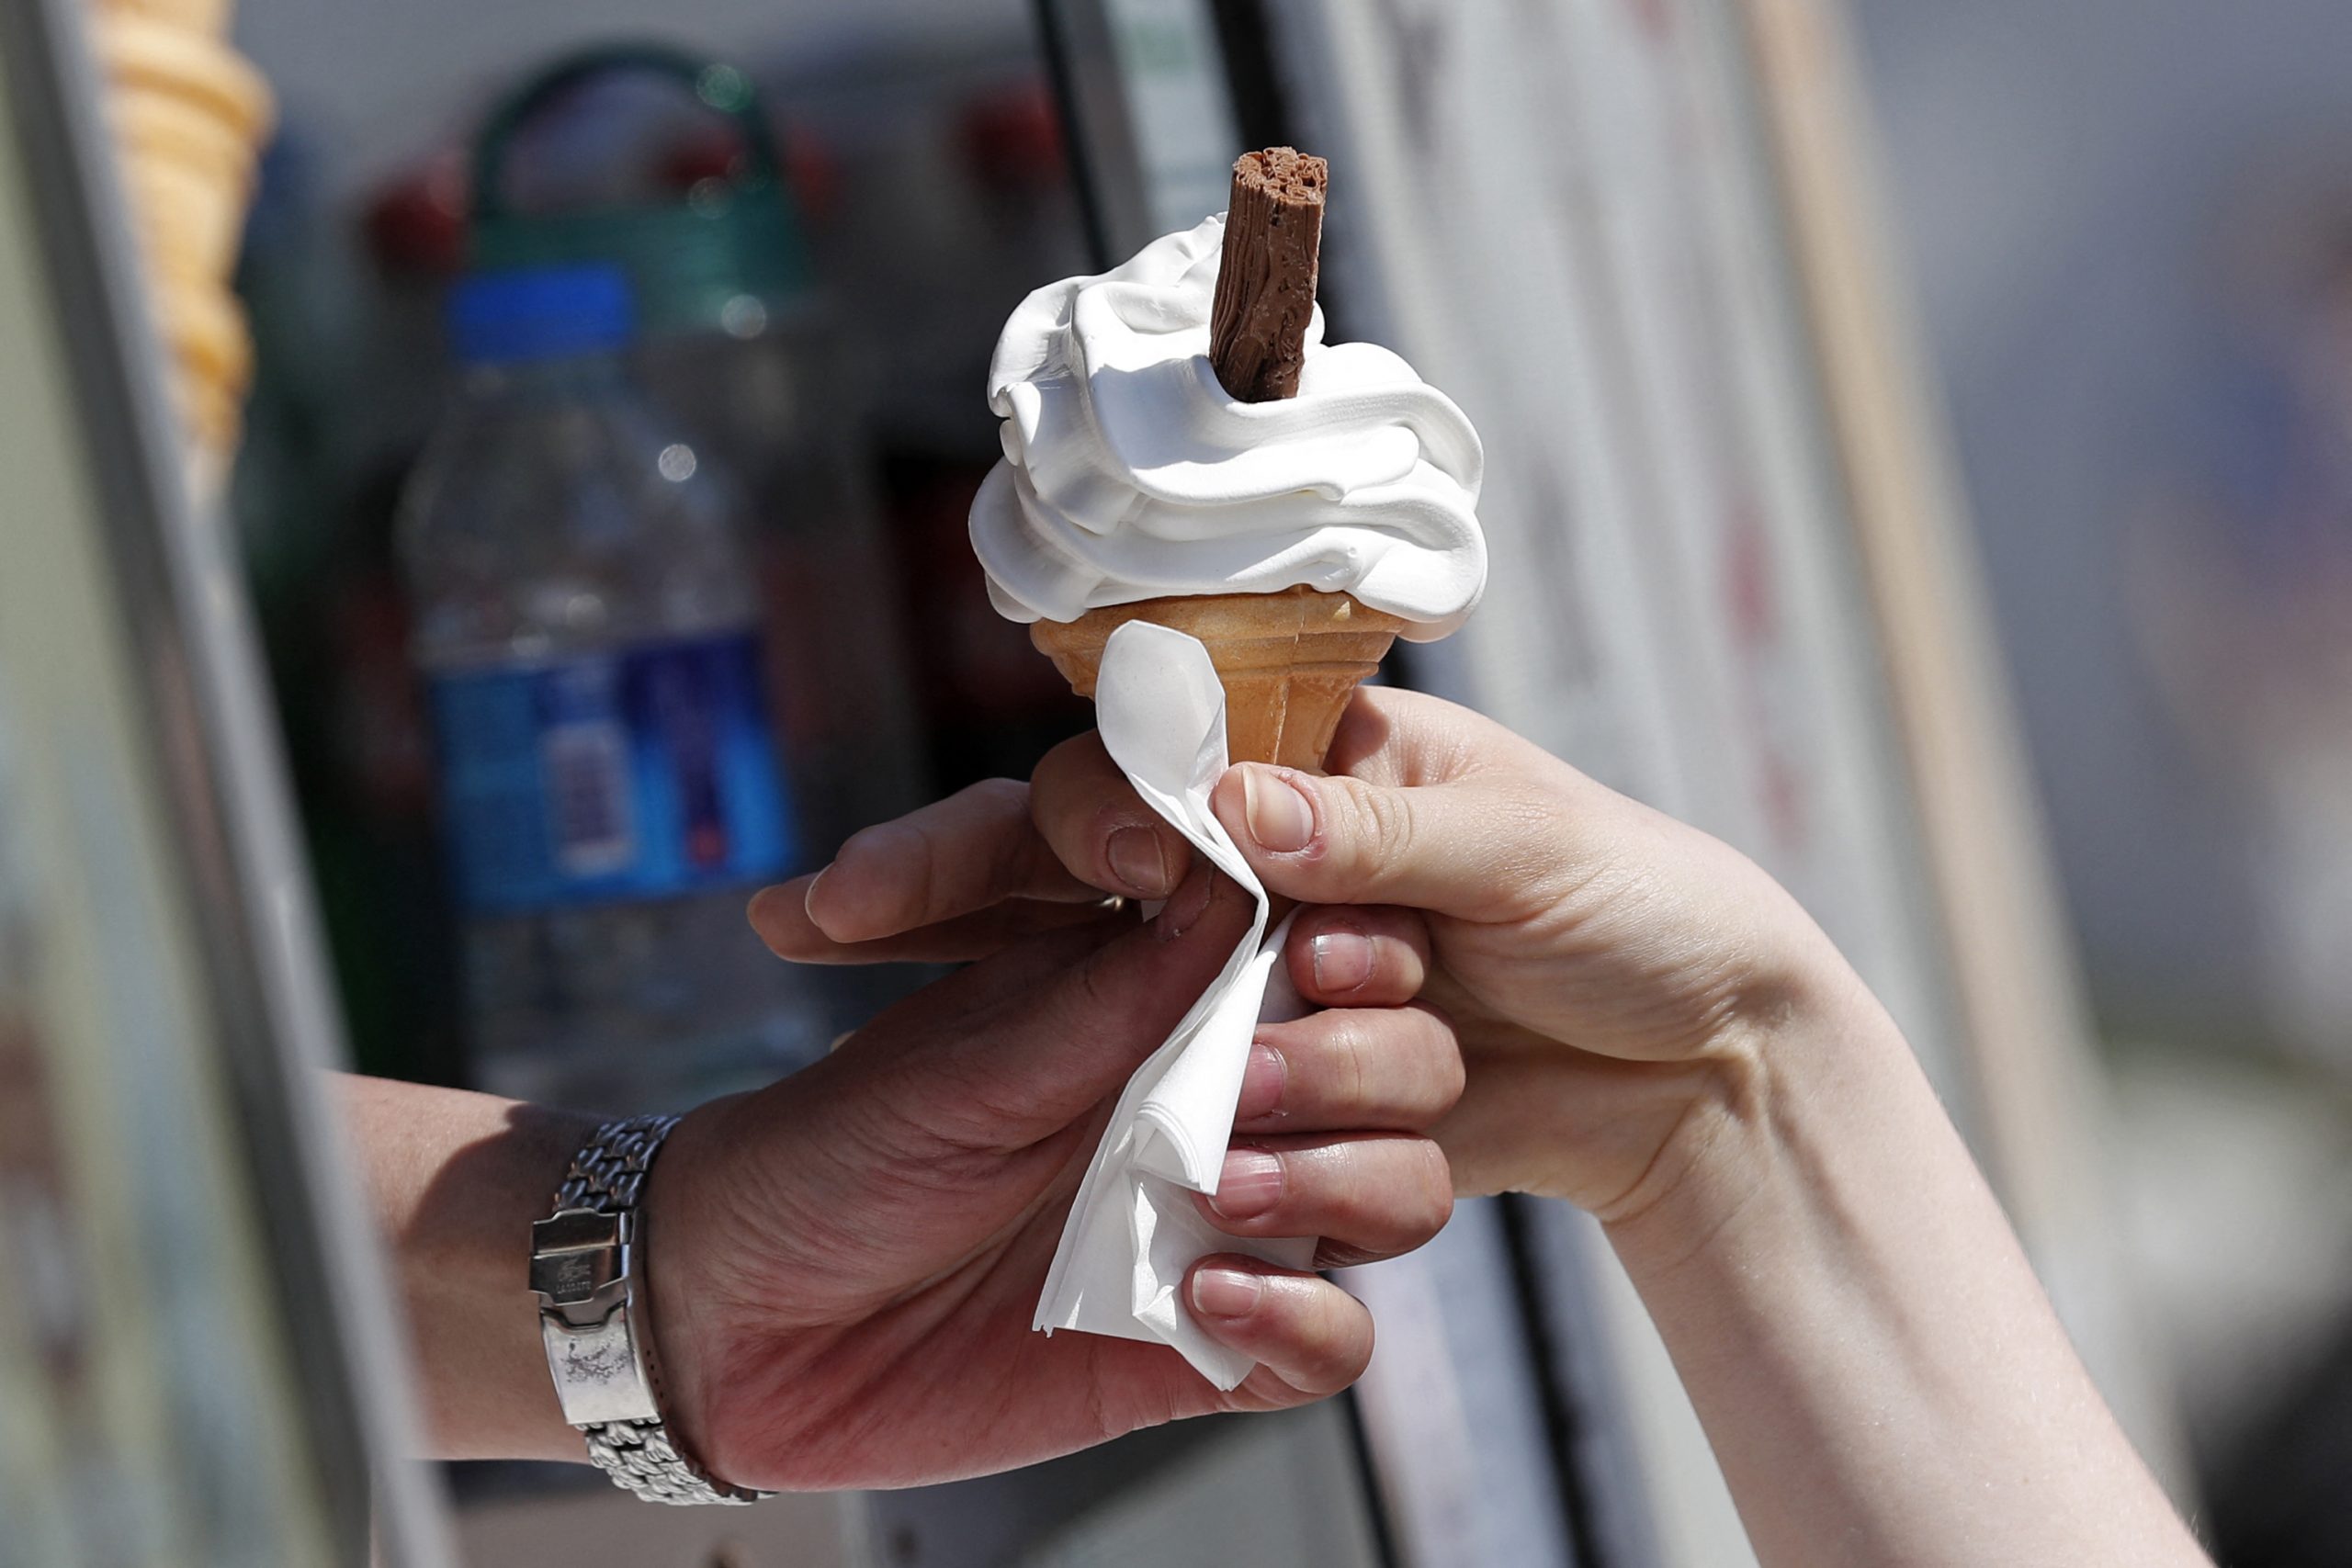 Russian Official Fears Men Licking Ice Cream Has Gay Undertone [Video]